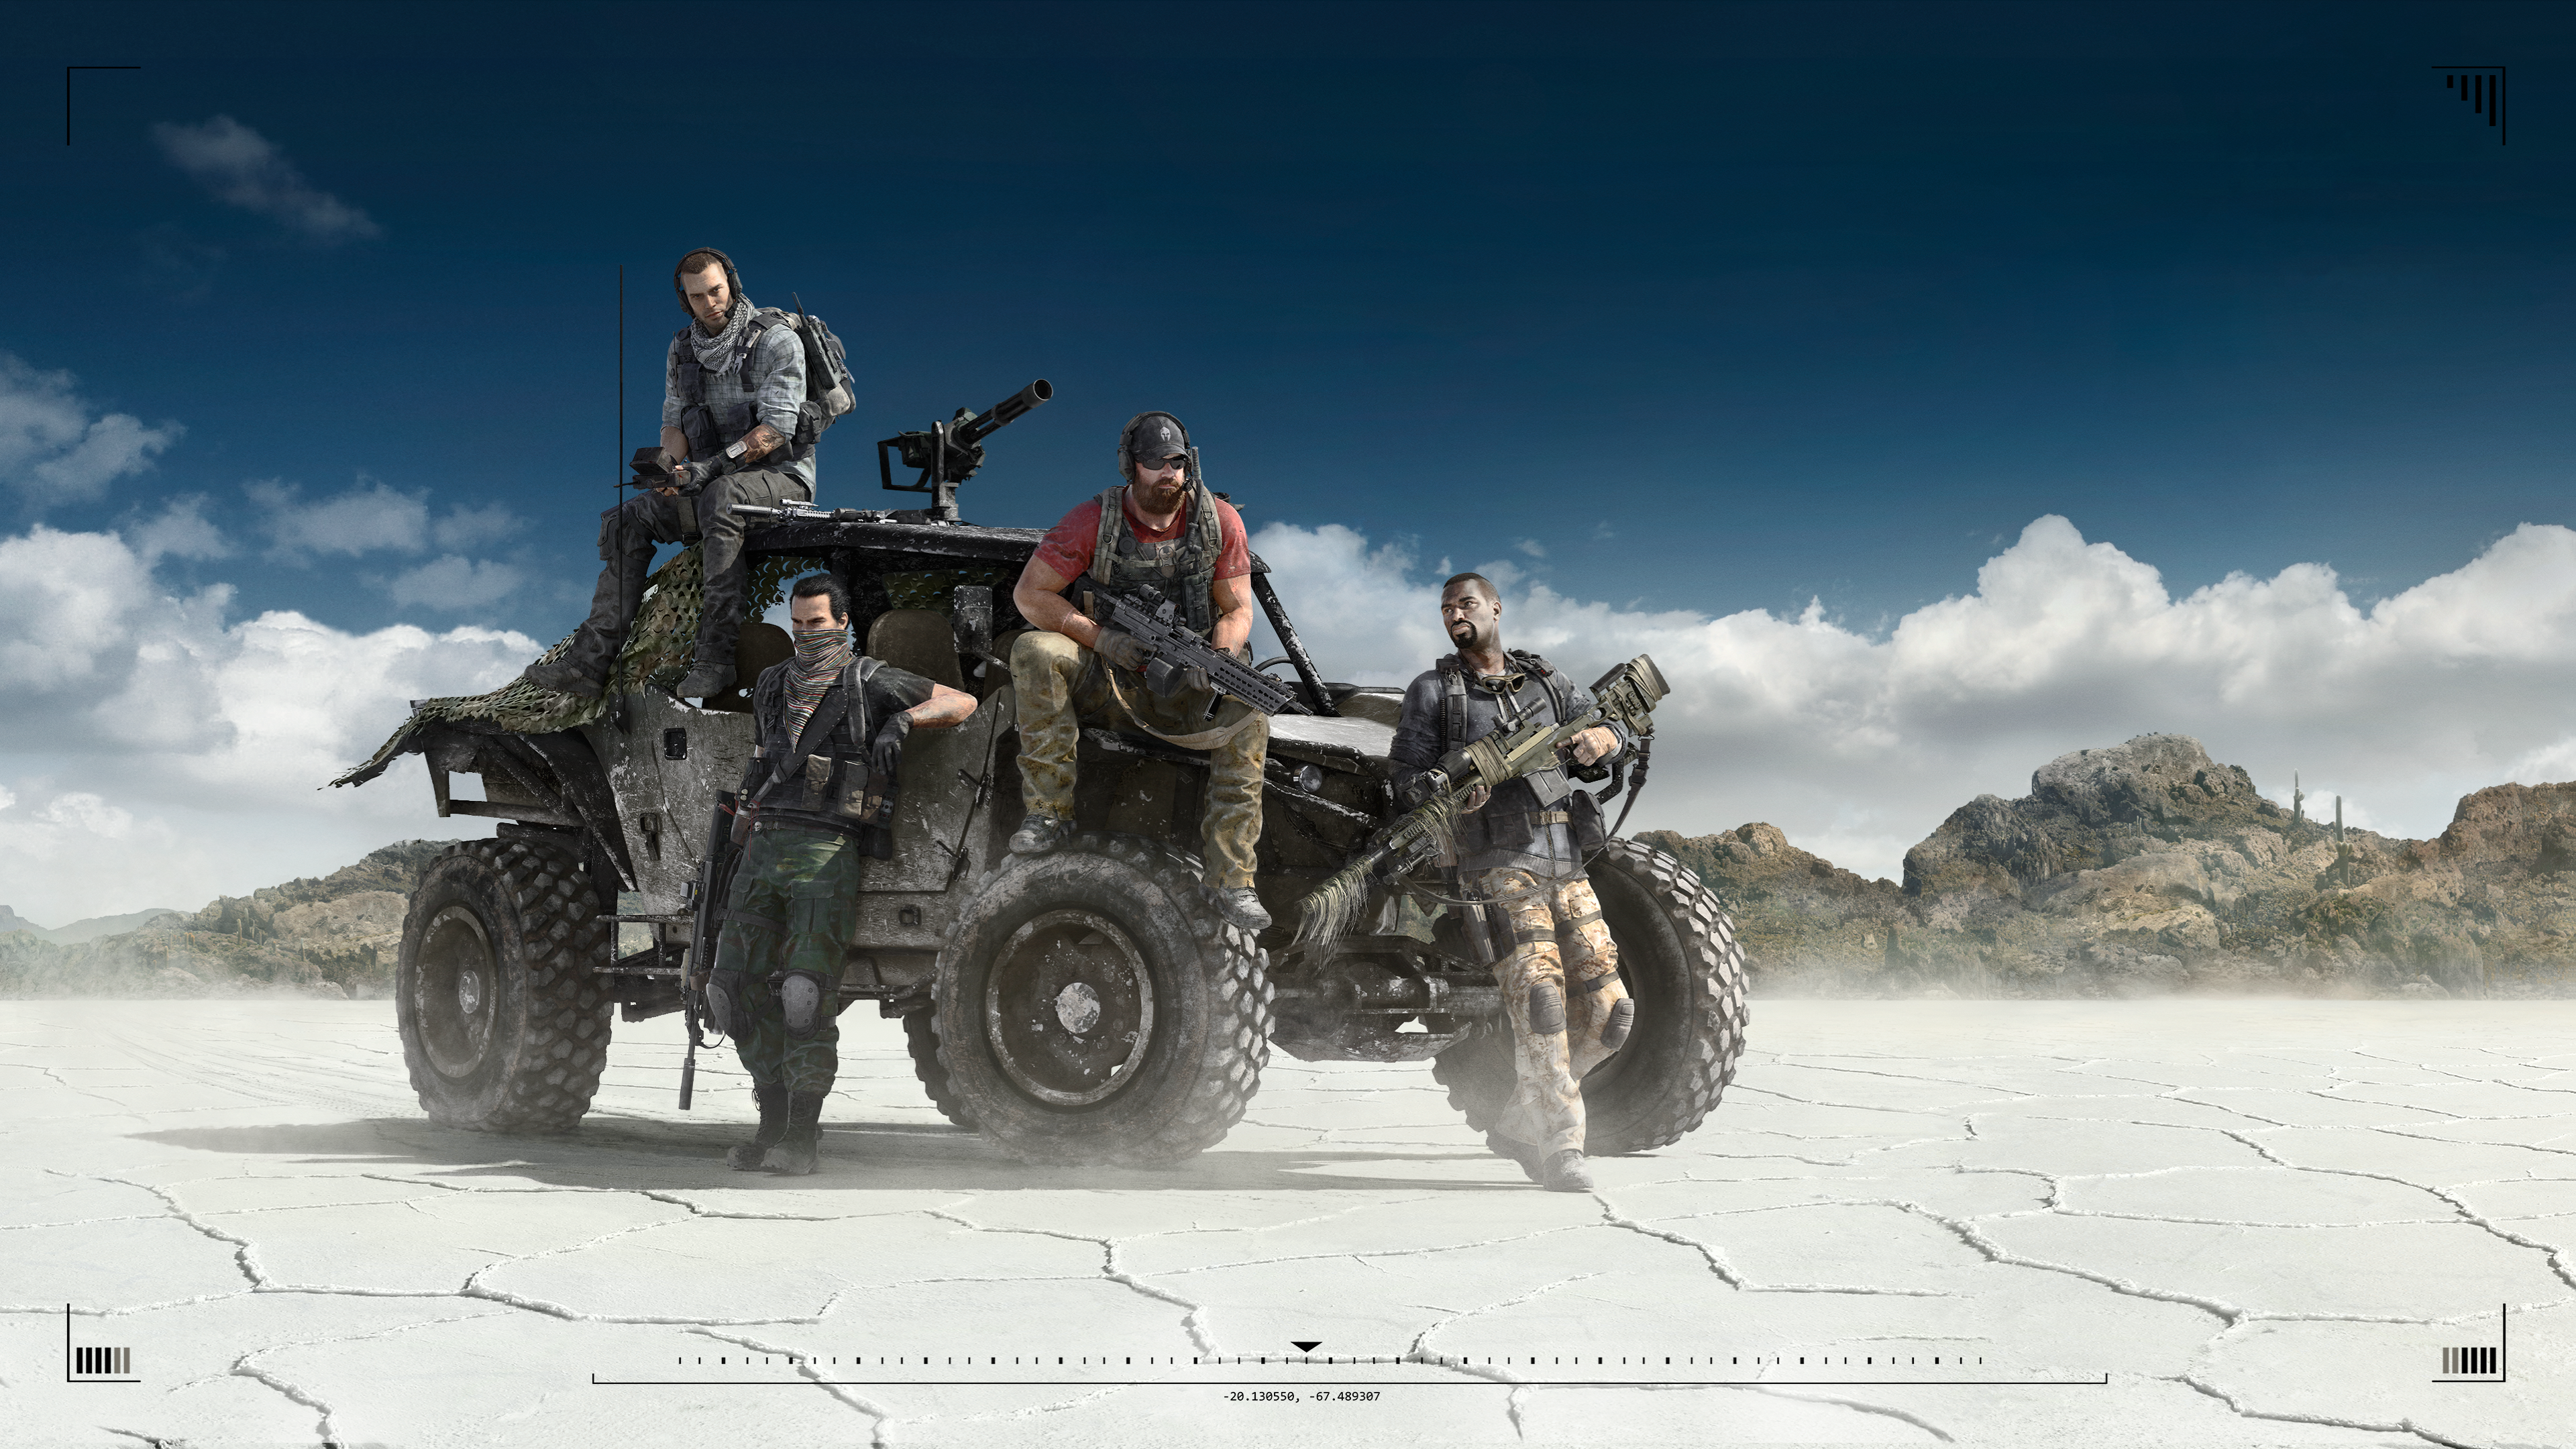 Video Game Tom Clancy’s Ghost Recon Wildlands HD Wallpaper | Background Image